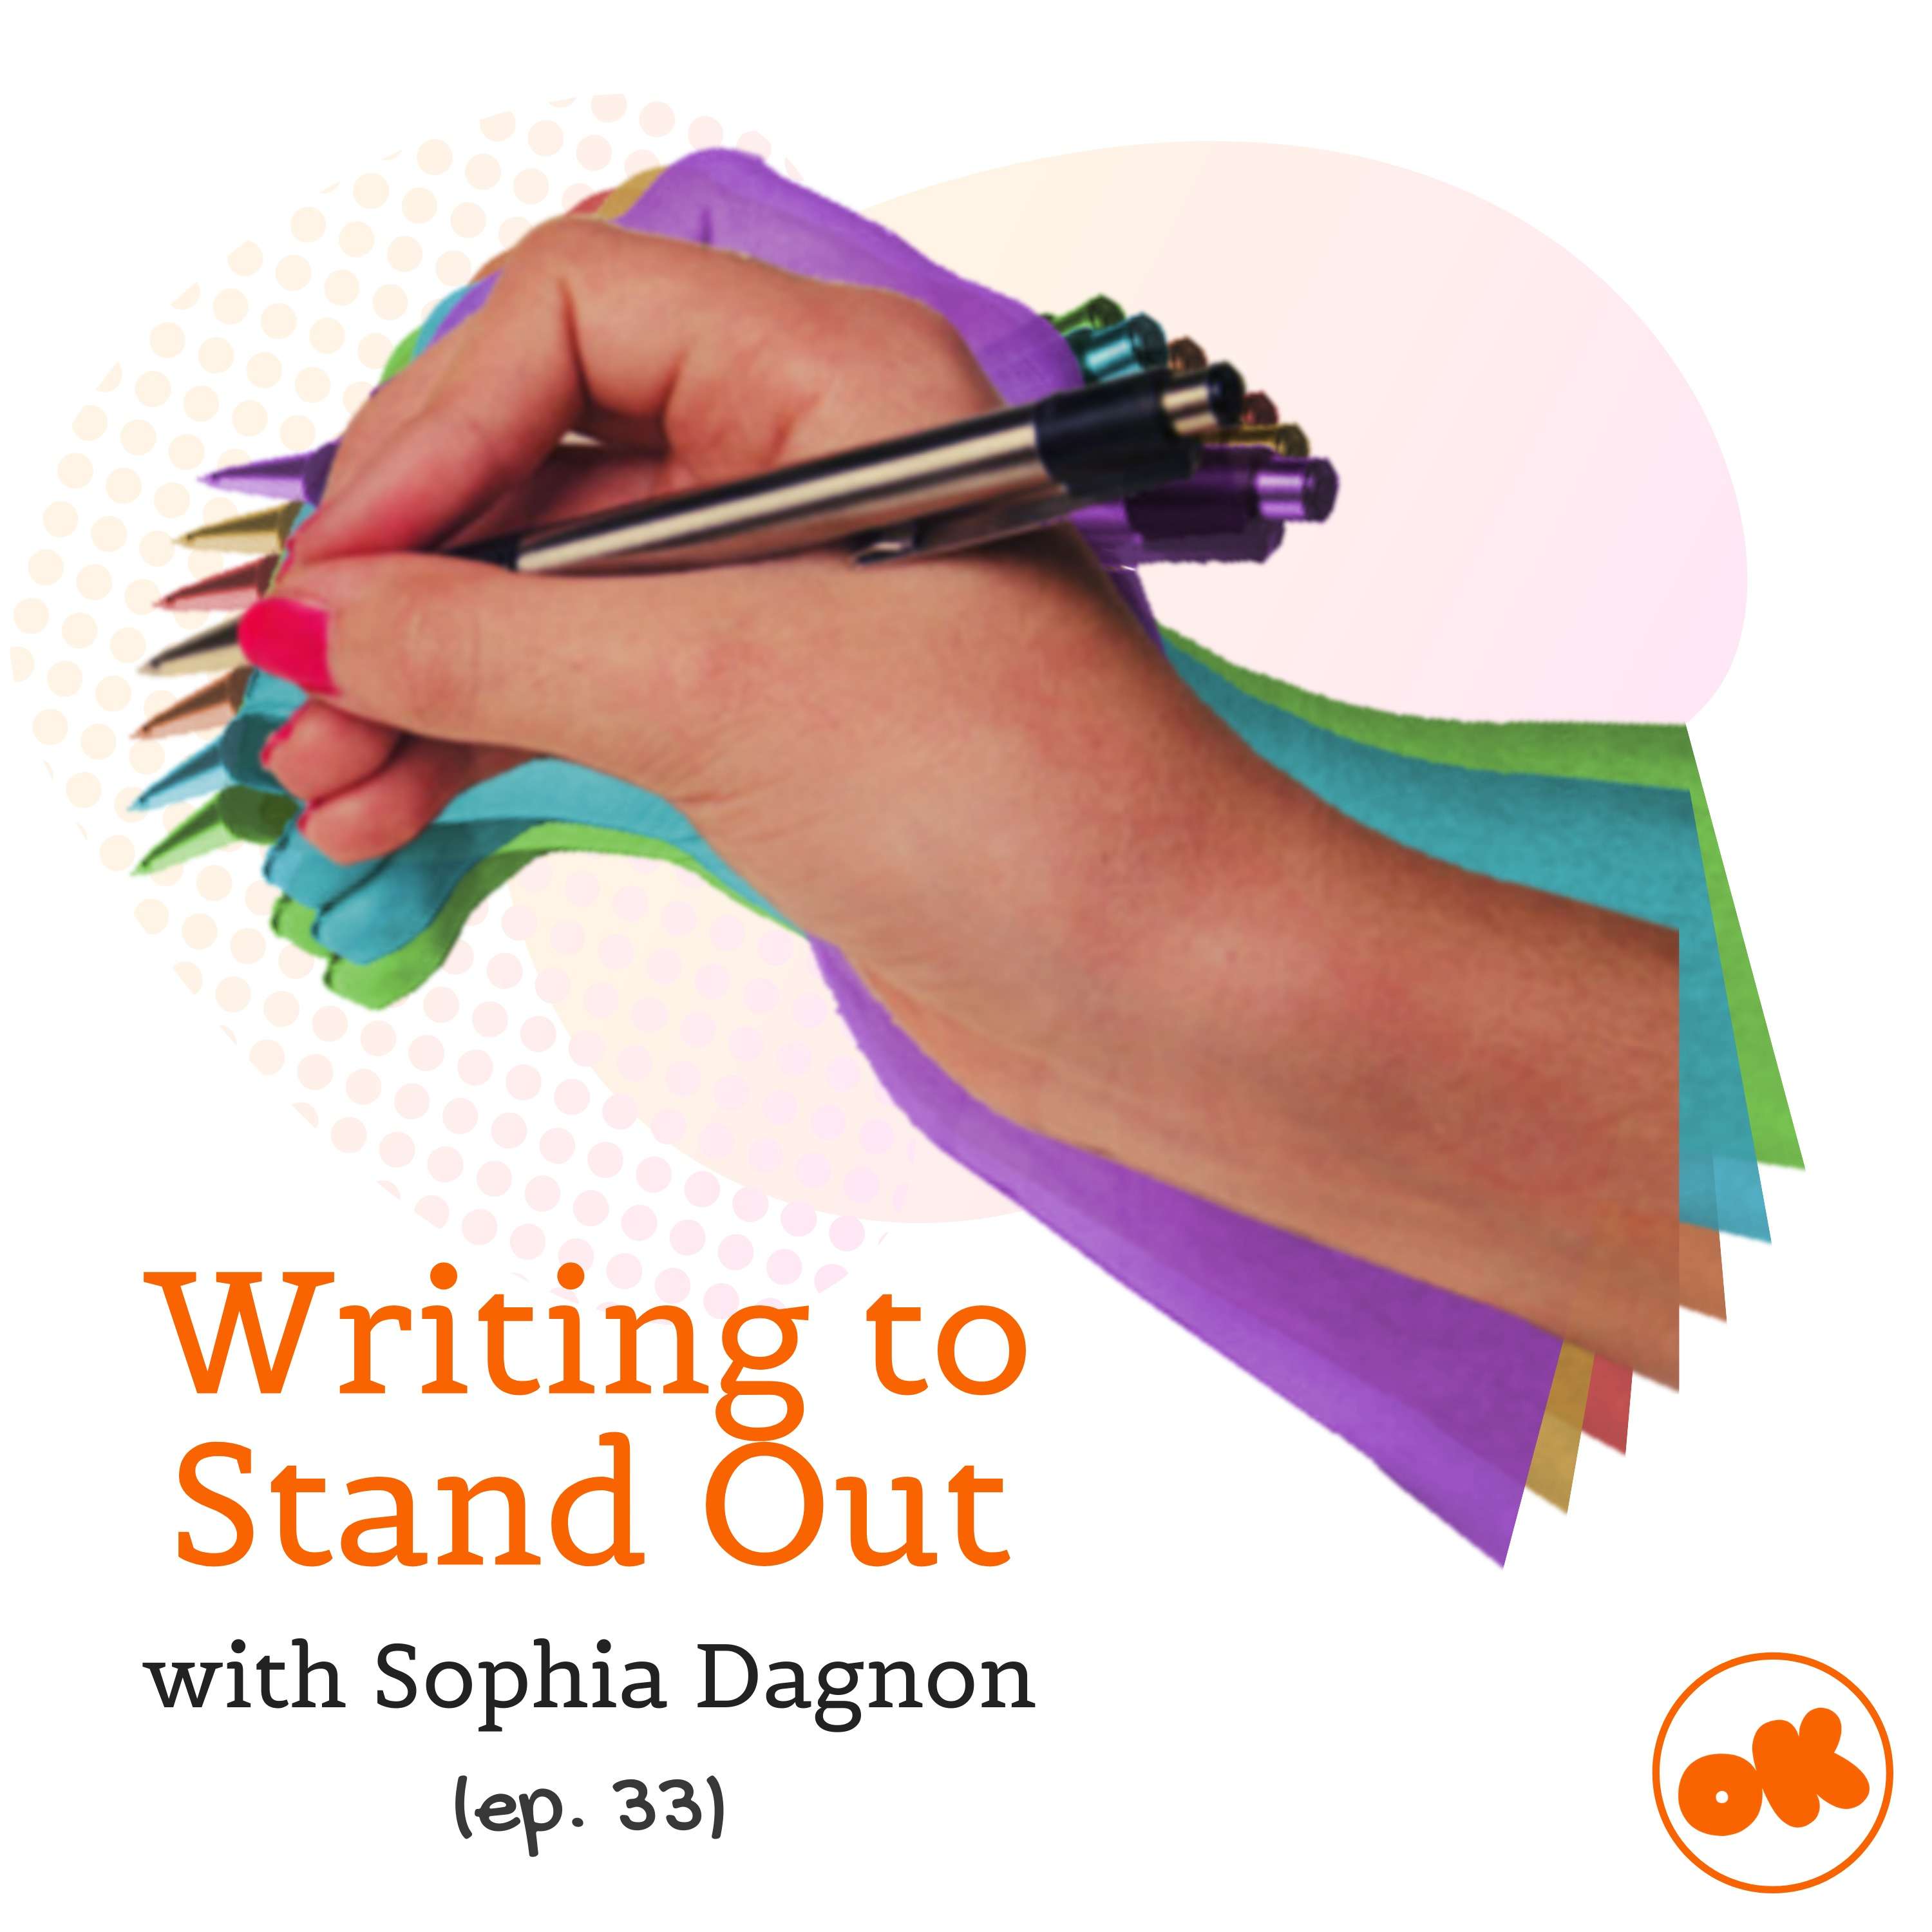 033. Writing to Stand Out, with Sophia Dagnon